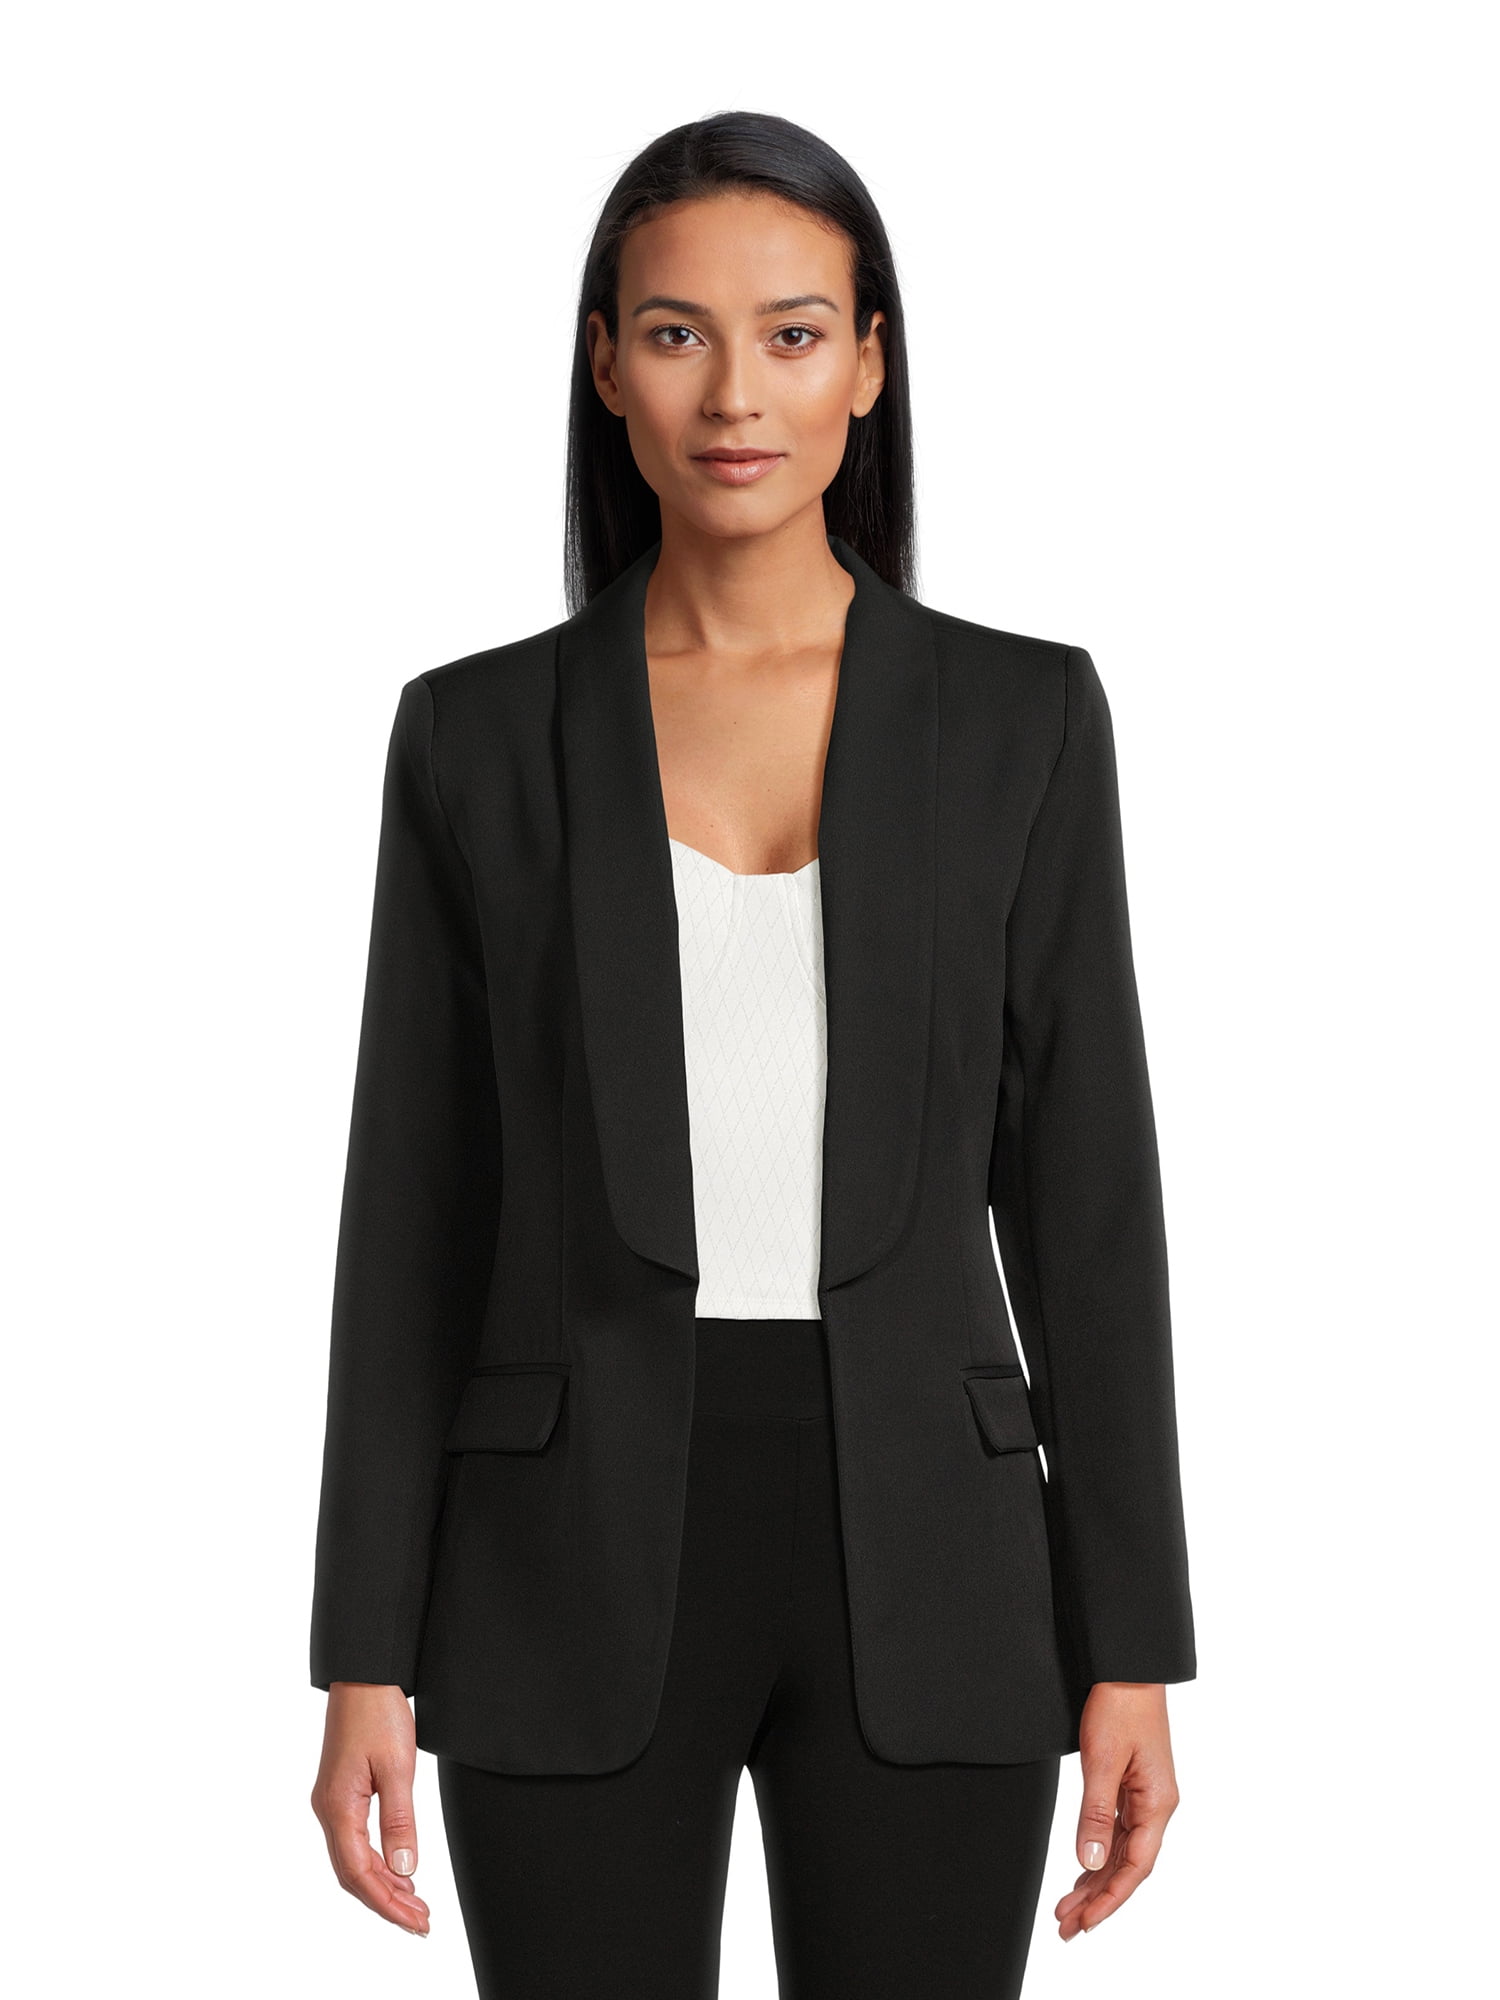 Attitude Unknown Women's Shawl Collar Relaxed Fit Solid Blazer, Sizes ...